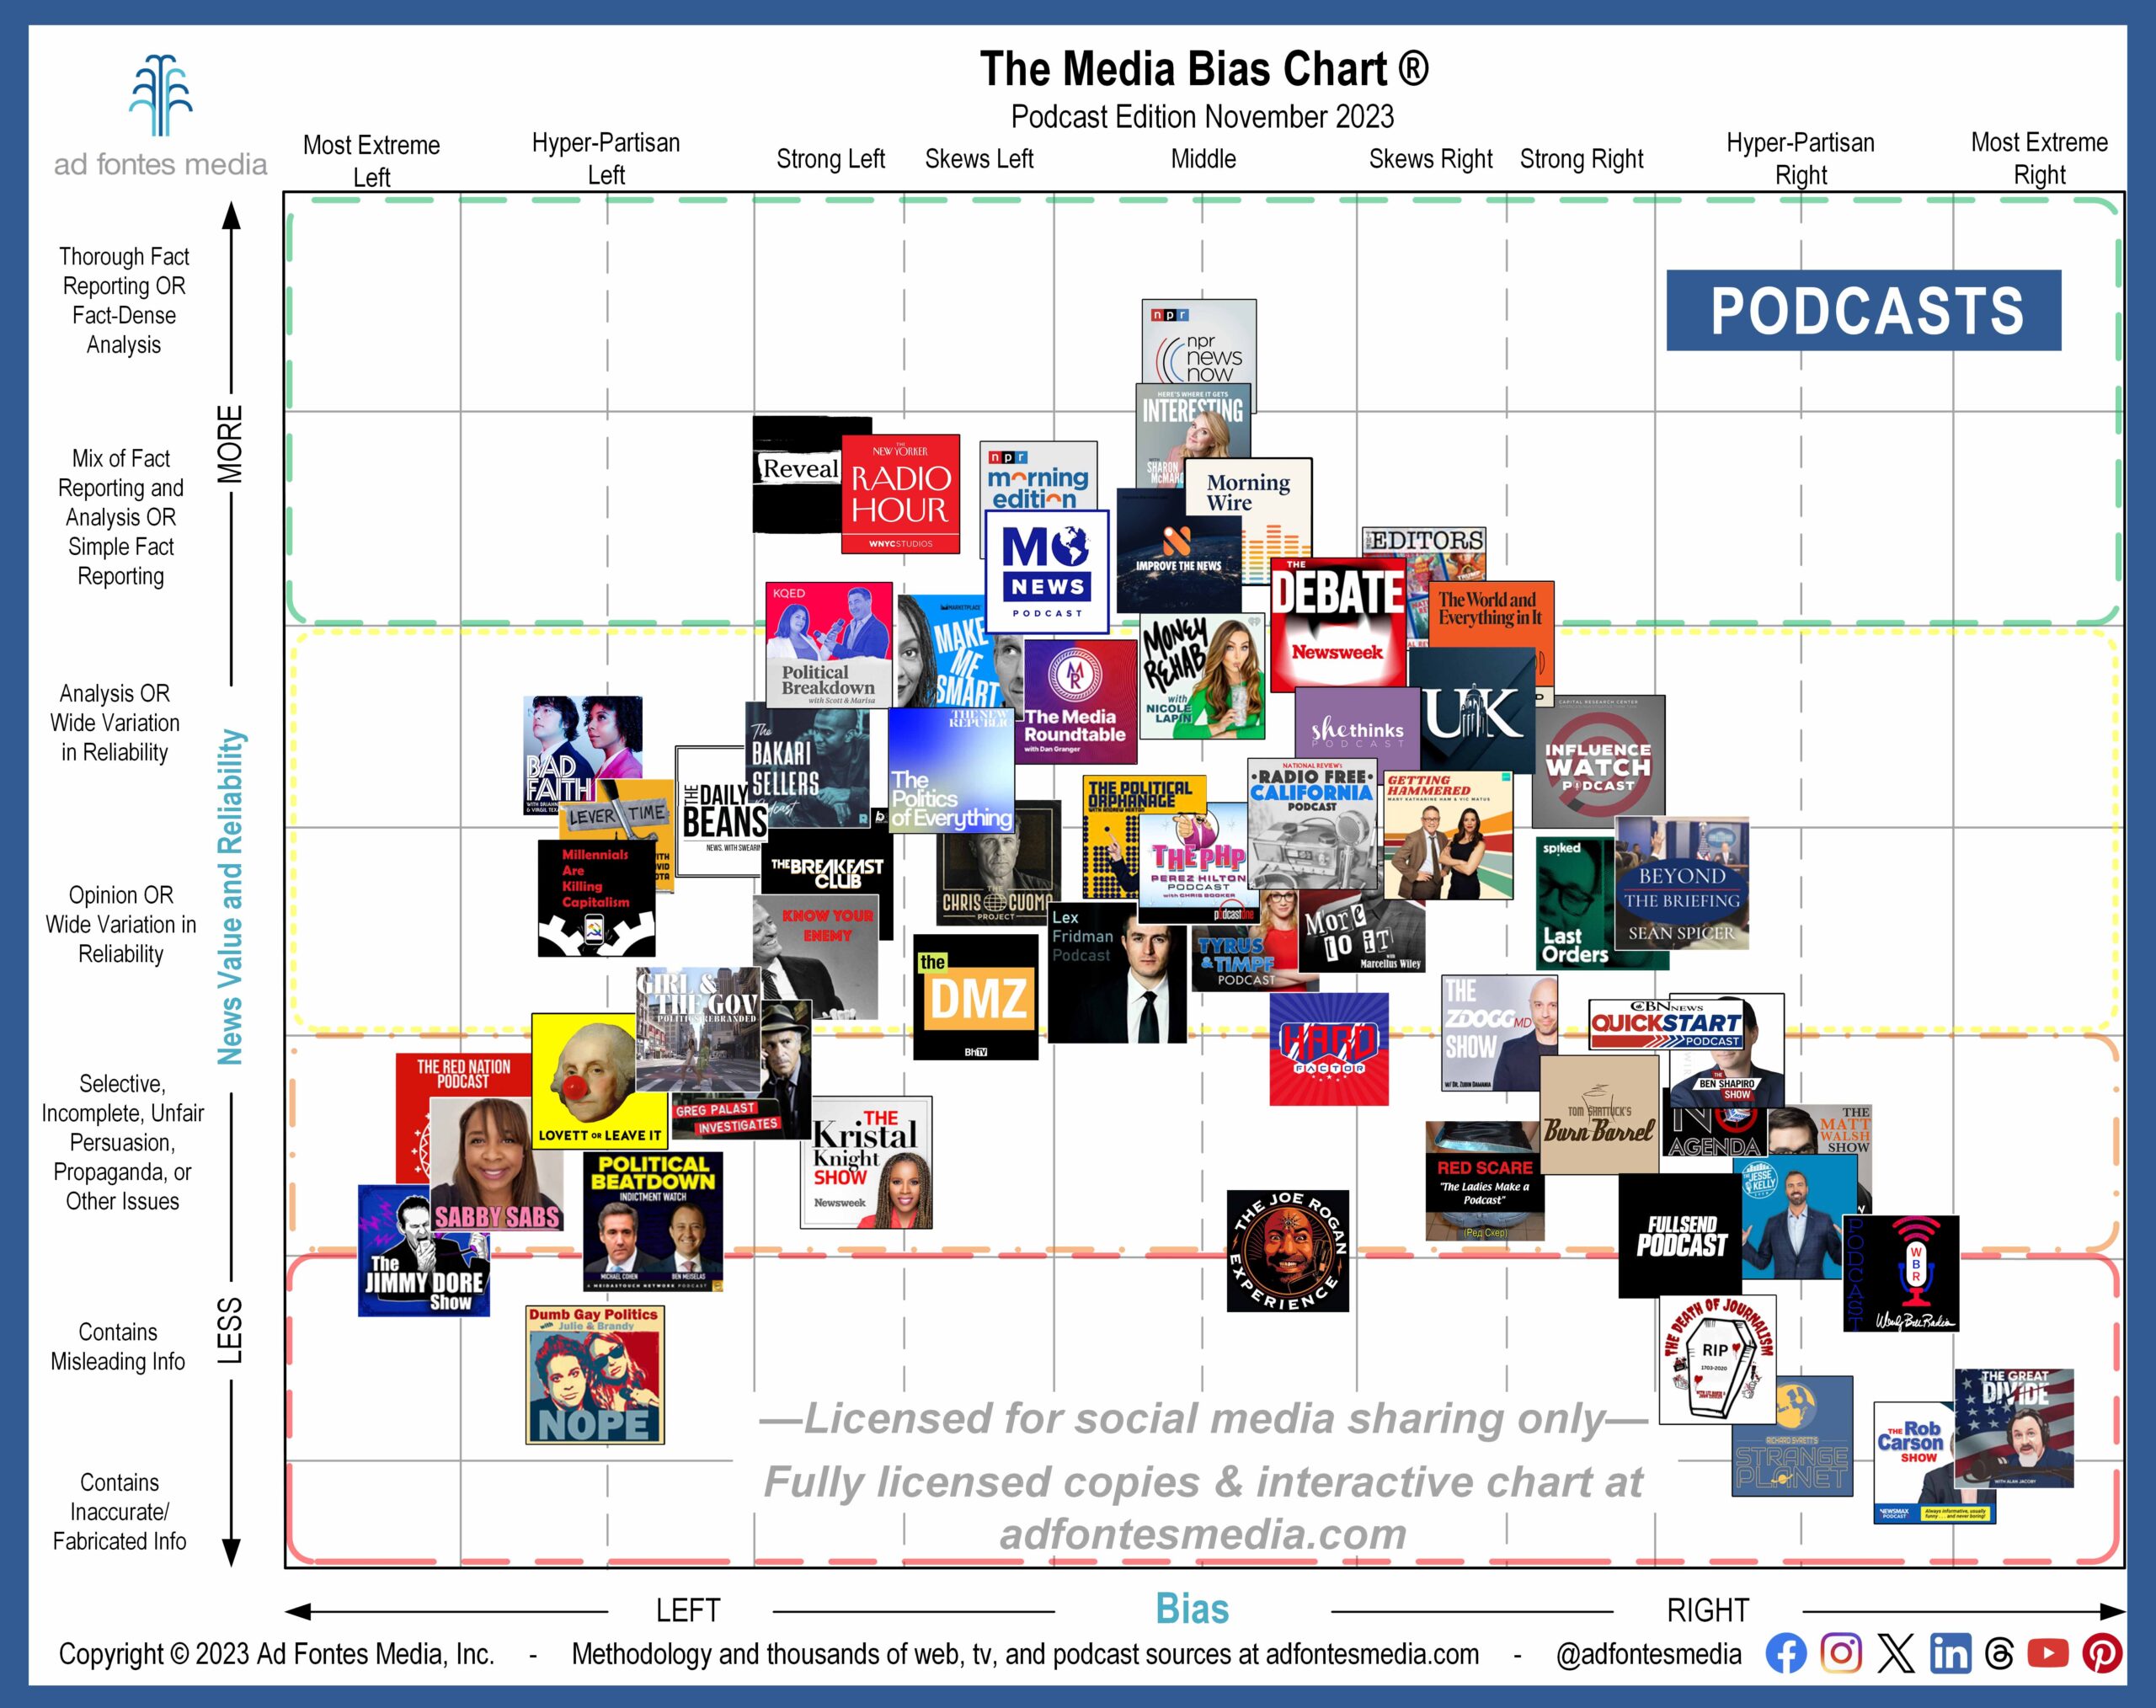 Media Bias Chart Reveals 10 New Shows on November’s Podcast Edition